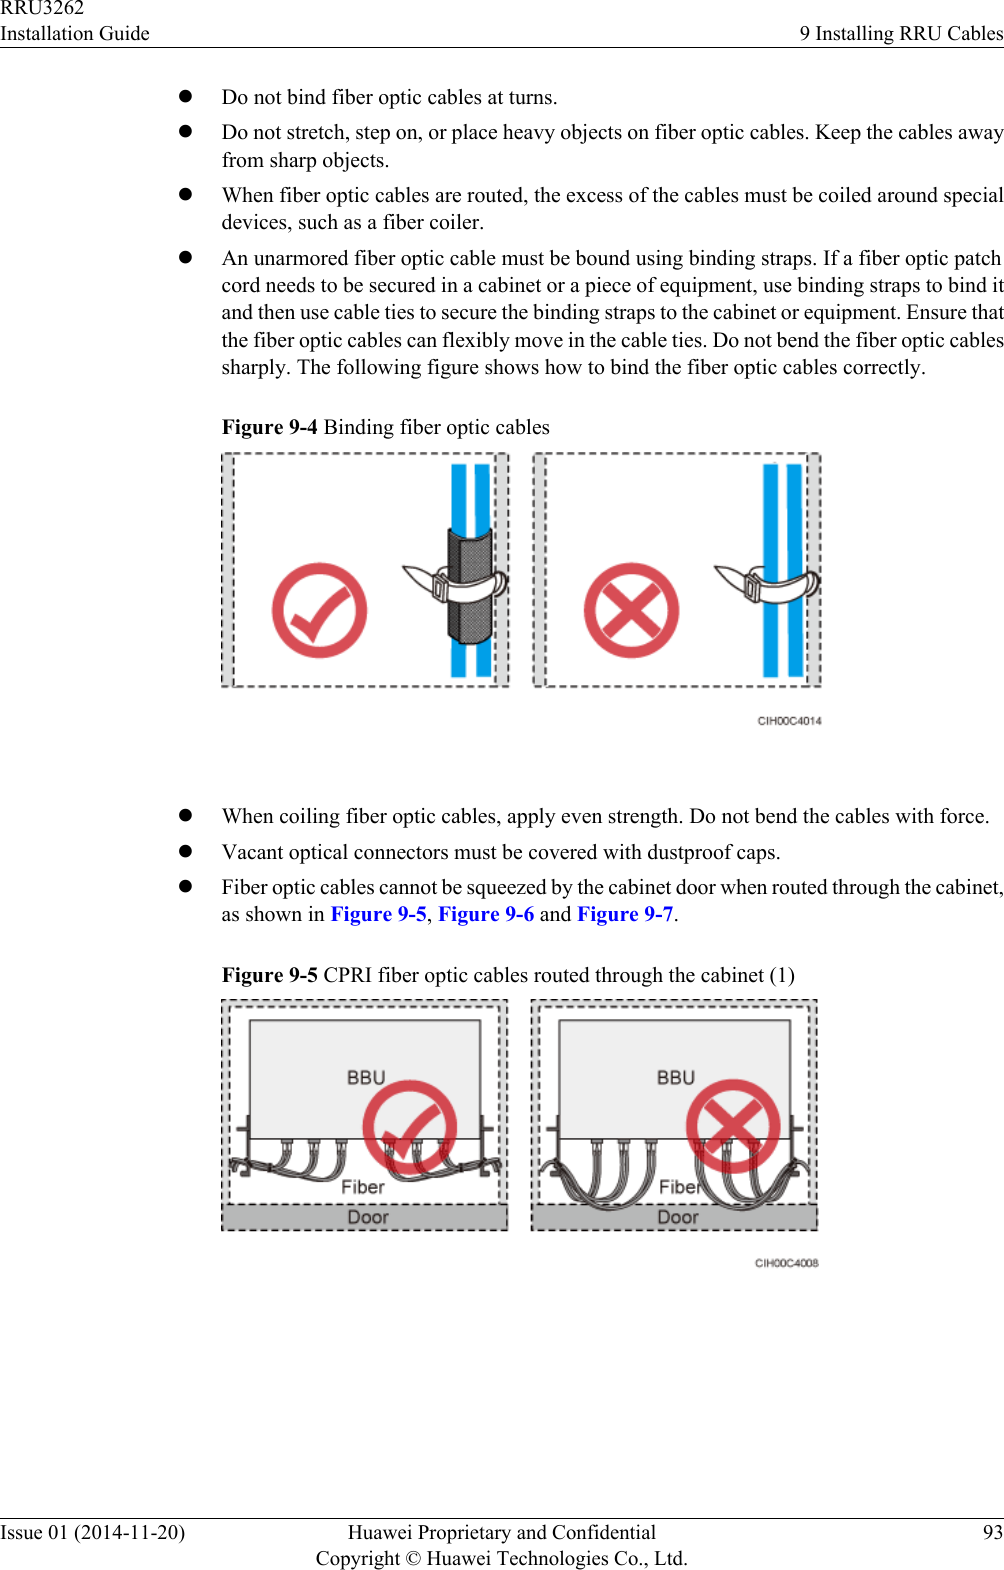 lDo not bind fiber optic cables at turns.lDo not stretch, step on, or place heavy objects on fiber optic cables. Keep the cables awayfrom sharp objects.lWhen fiber optic cables are routed, the excess of the cables must be coiled around specialdevices, such as a fiber coiler.lAn unarmored fiber optic cable must be bound using binding straps. If a fiber optic patchcord needs to be secured in a cabinet or a piece of equipment, use binding straps to bind itand then use cable ties to secure the binding straps to the cabinet or equipment. Ensure thatthe fiber optic cables can flexibly move in the cable ties. Do not bend the fiber optic cablessharply. The following figure shows how to bind the fiber optic cables correctly.Figure 9-4 Binding fiber optic cables lWhen coiling fiber optic cables, apply even strength. Do not bend the cables with force.lVacant optical connectors must be covered with dustproof caps.lFiber optic cables cannot be squeezed by the cabinet door when routed through the cabinet,as shown in Figure 9-5, Figure 9-6 and Figure 9-7.Figure 9-5 CPRI fiber optic cables routed through the cabinet (1) RRU3262Installation Guide 9 Installing RRU CablesIssue 01 (2014-11-20) Huawei Proprietary and ConfidentialCopyright © Huawei Technologies Co., Ltd.93